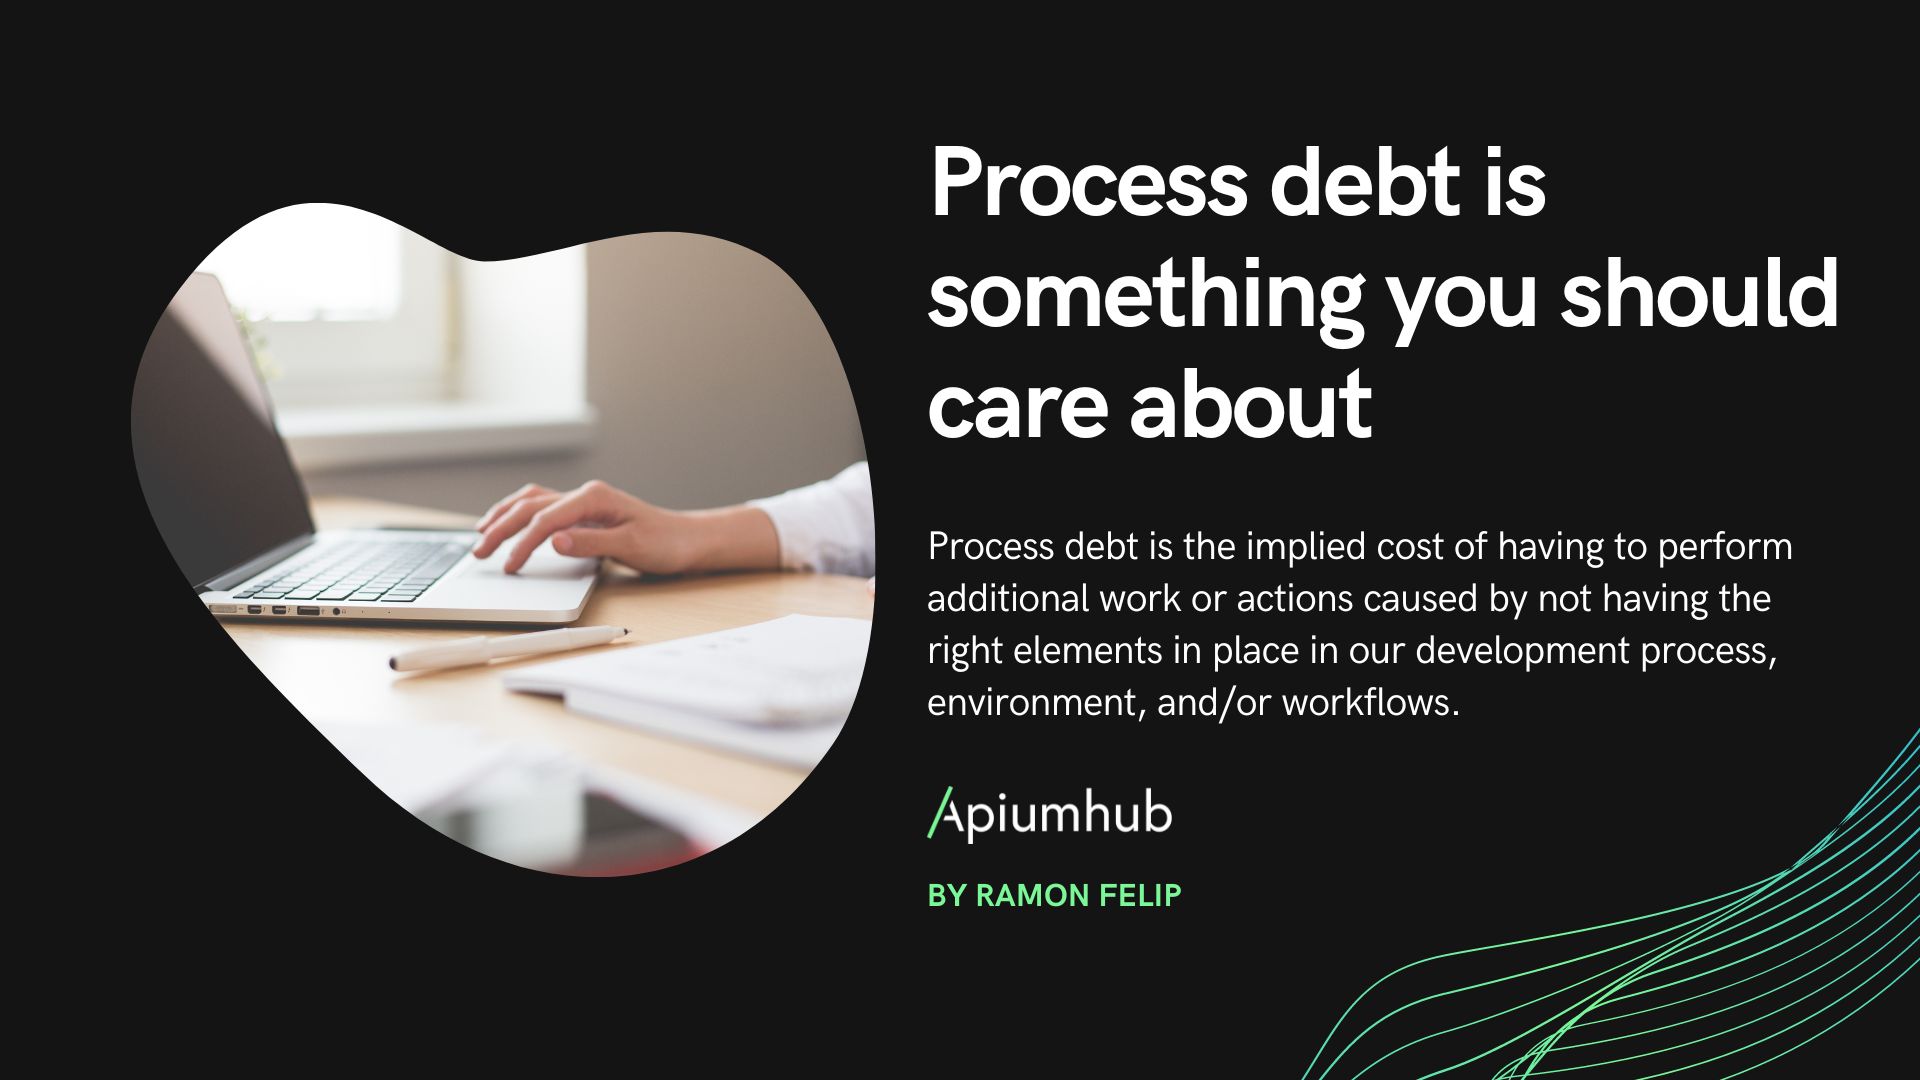 Process debt is something you should care about 